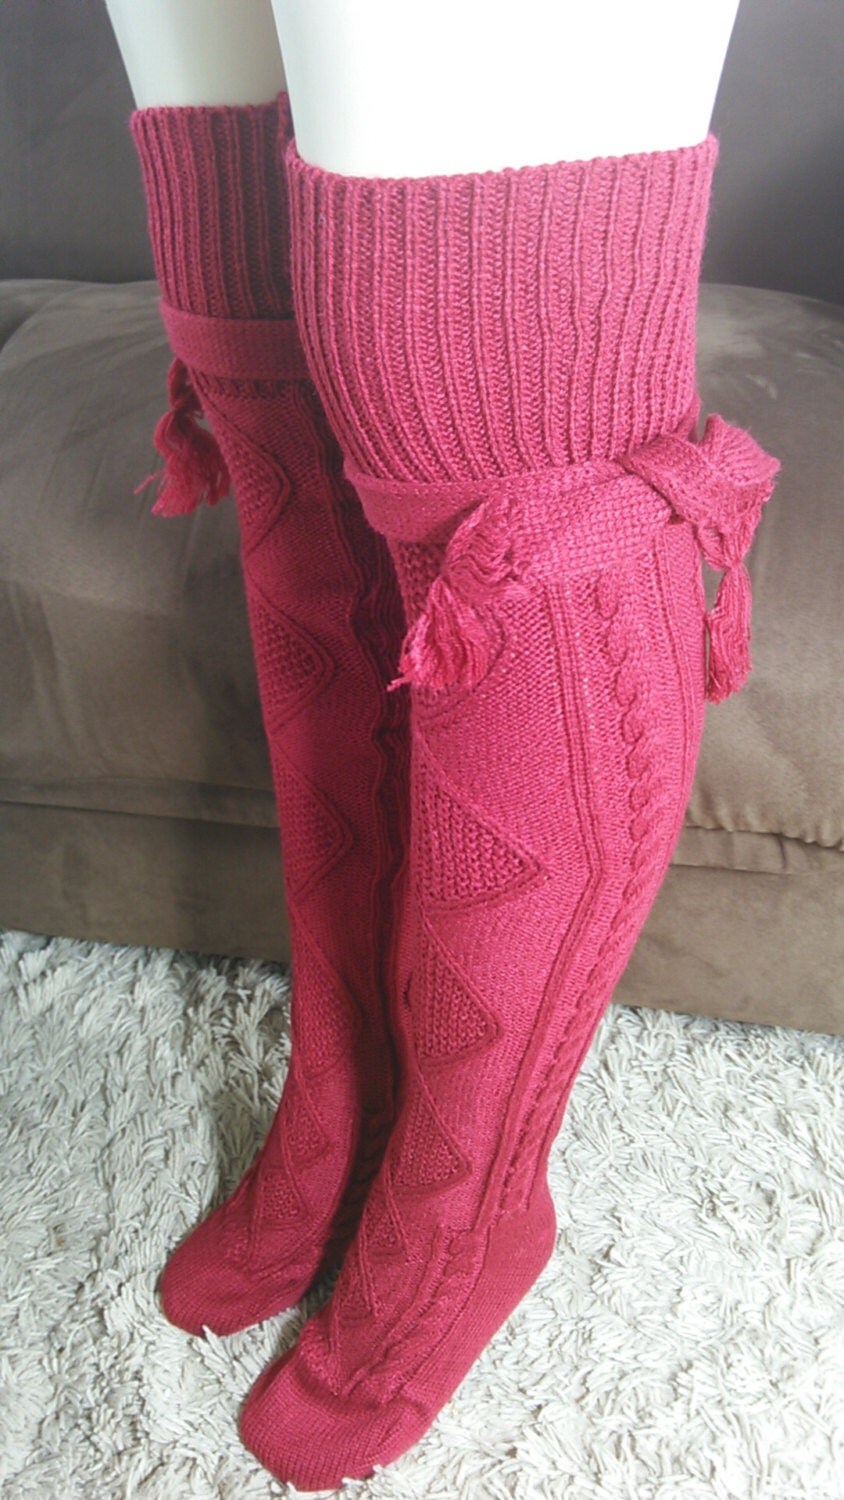 Red Cable knit knee high socks by JennysTreasure4U on Etsy